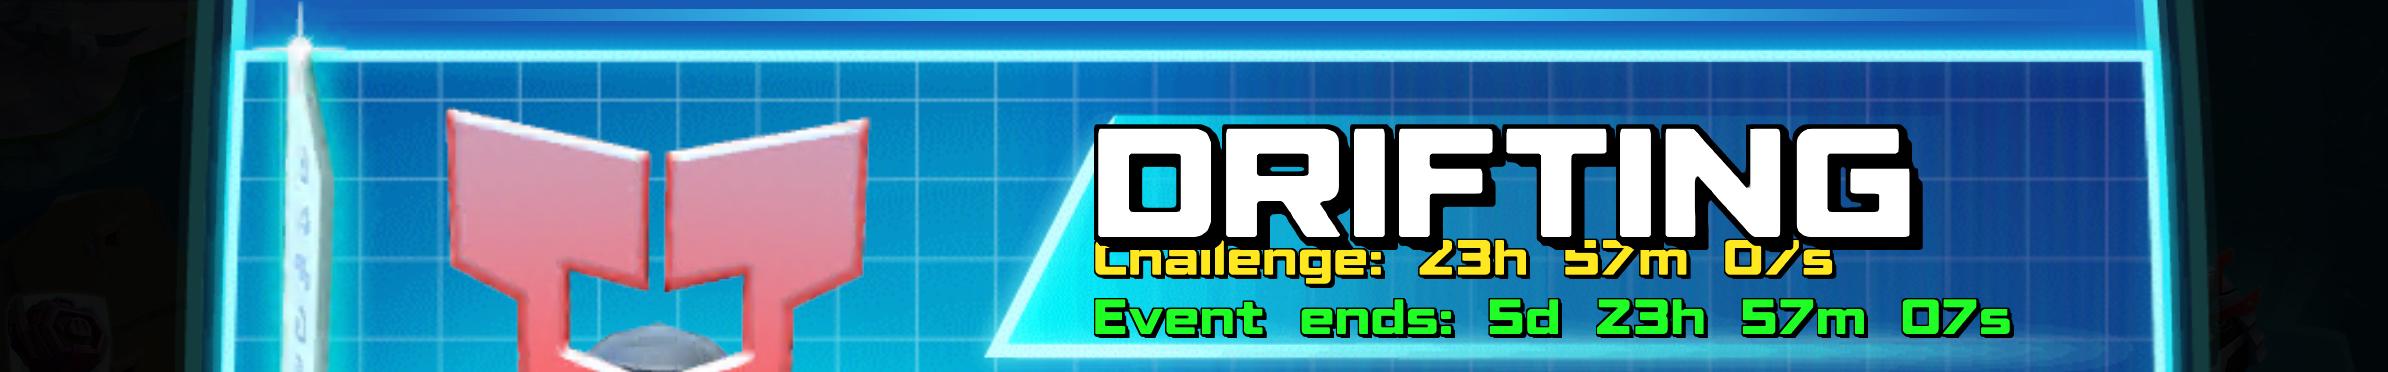 (Partial) The event banner for Drift